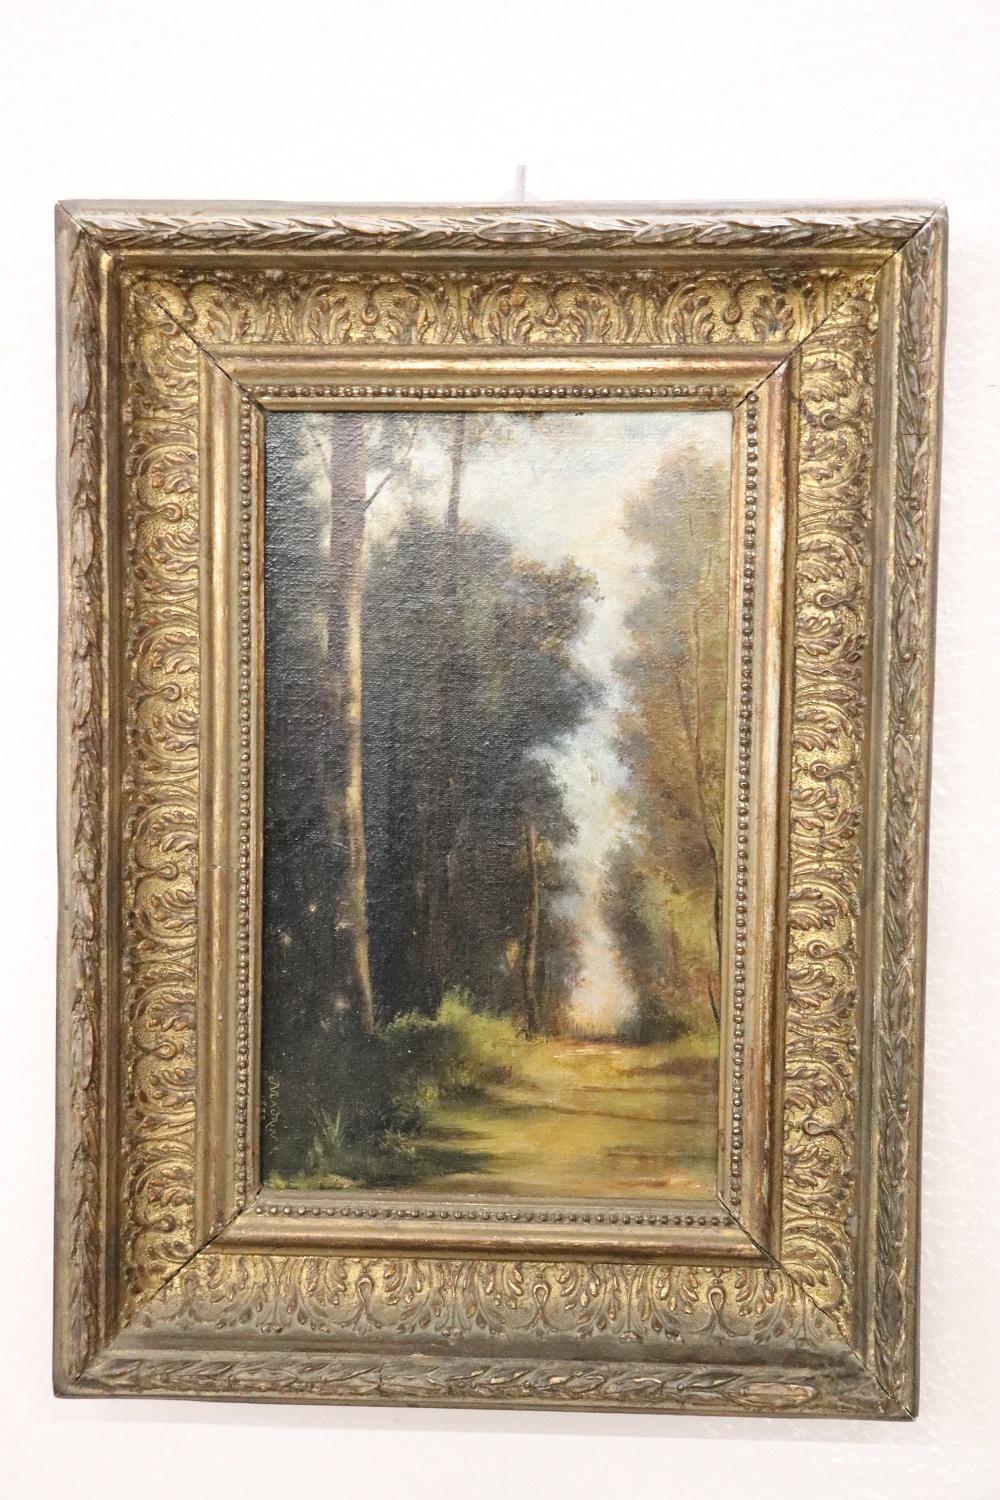 Beautiful 19th century pair of antique oil paintings on canvas with original frame. Signed and dated. Excellent pictorial quality, well represented a wooded landscape.